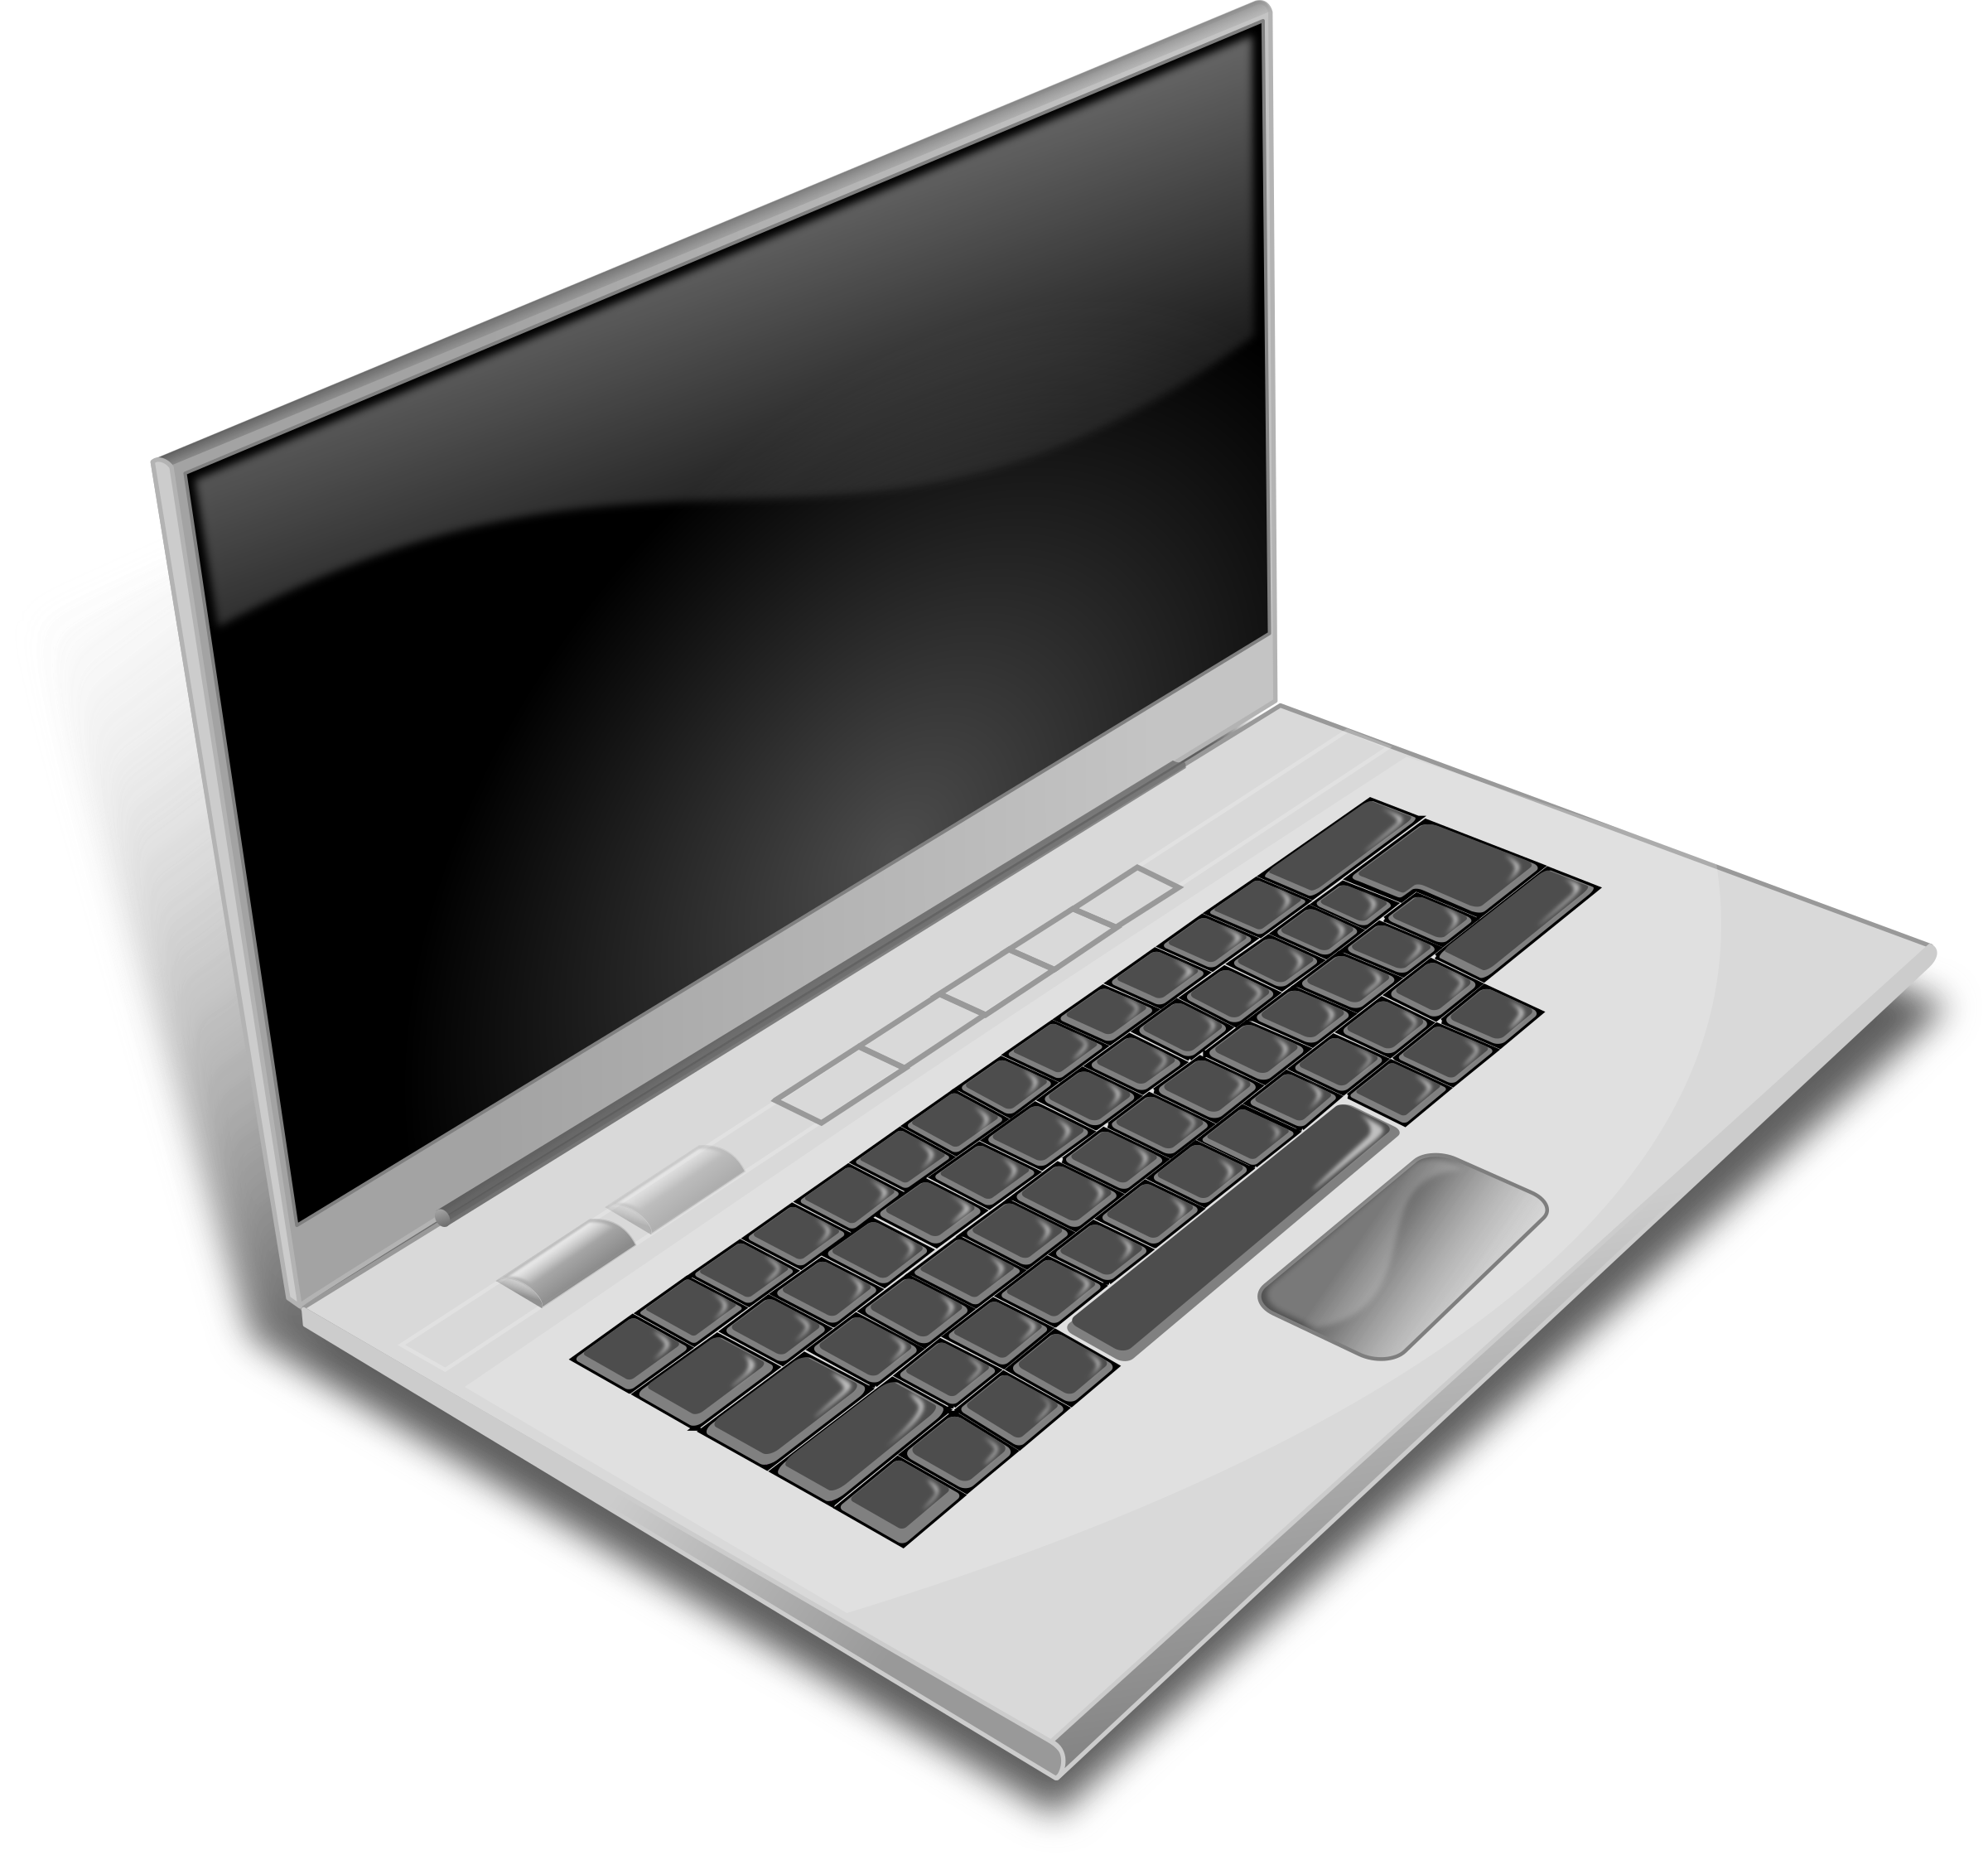 email clipart laptop